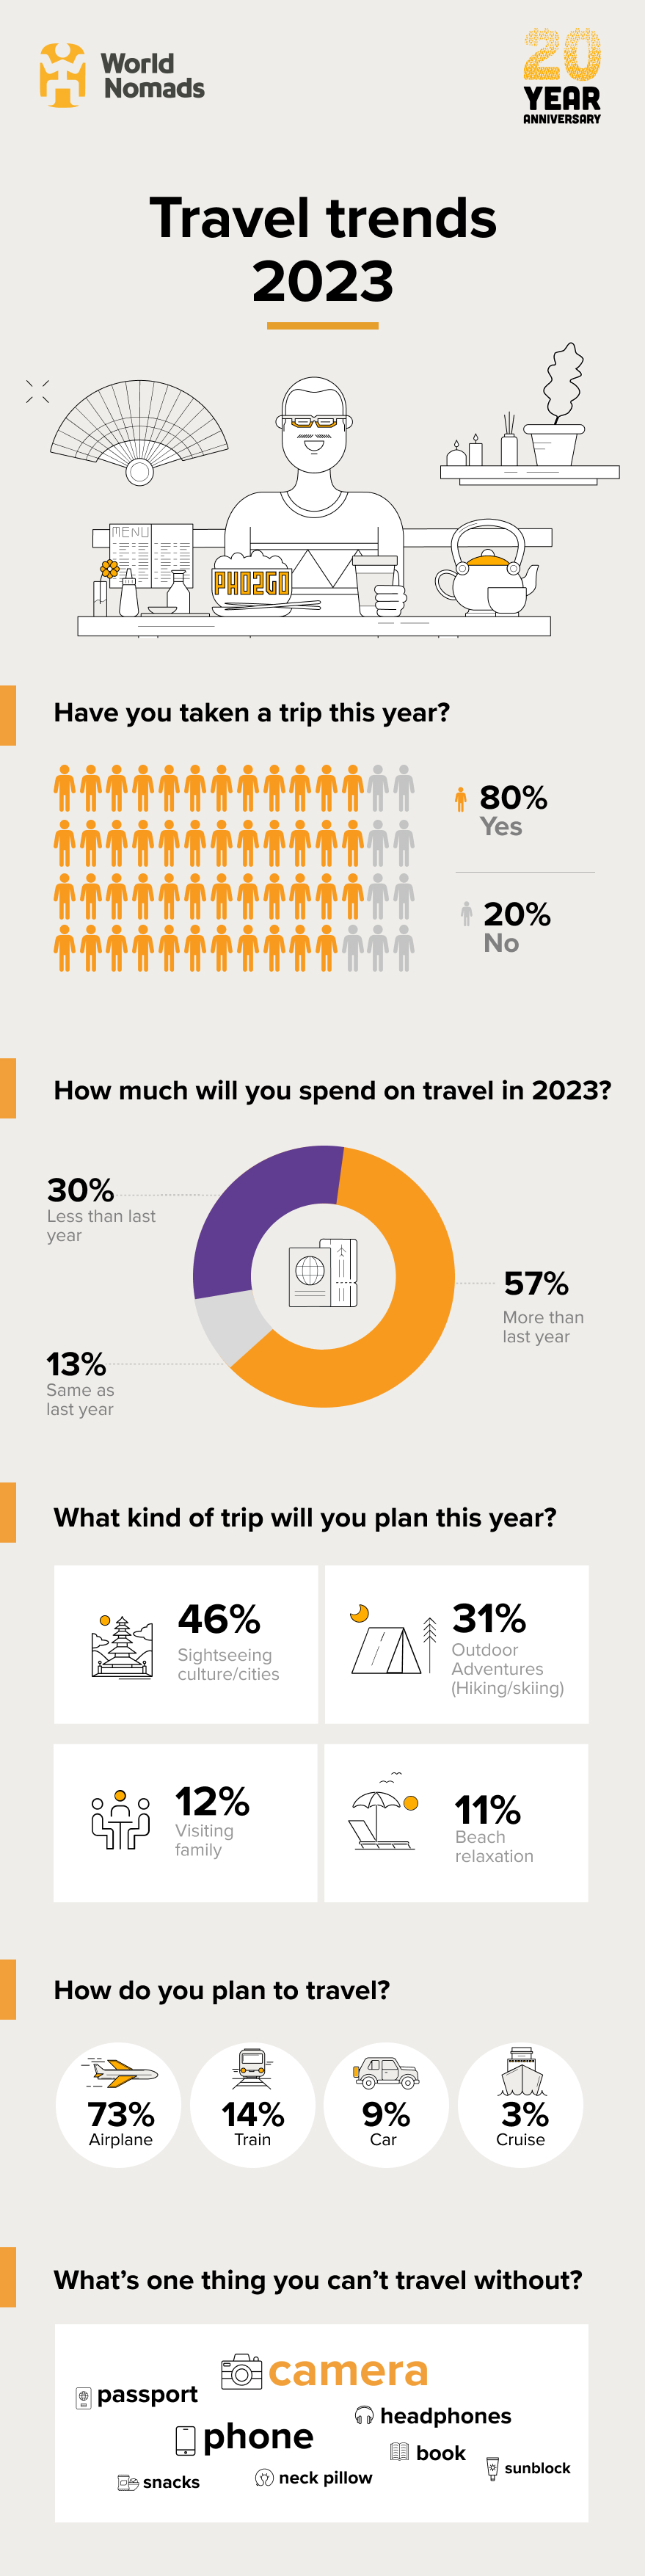 An infographic of travel trends